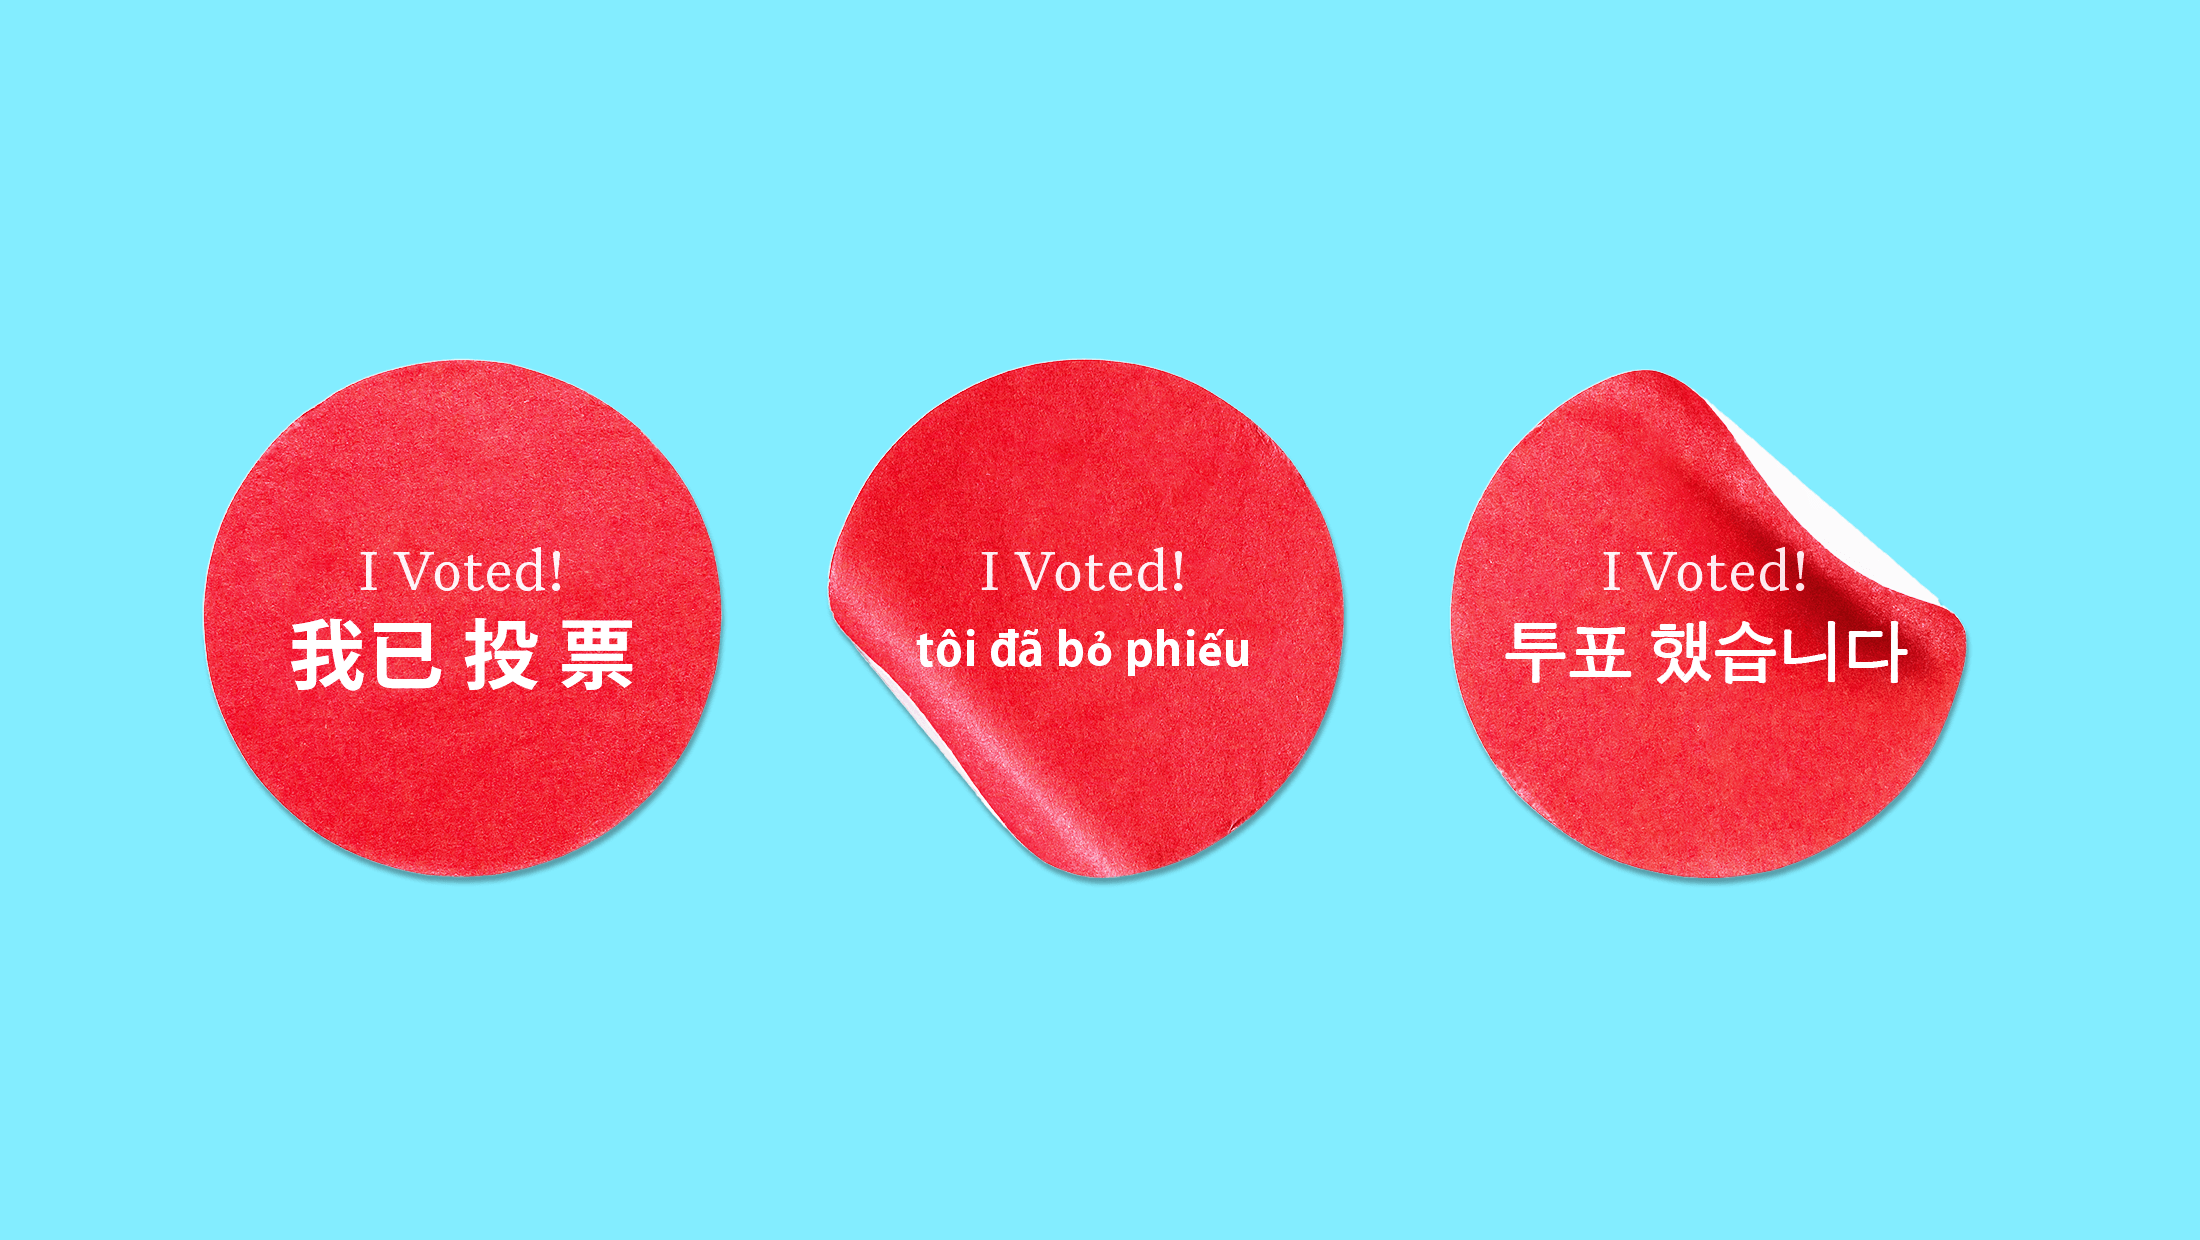 Three voting stickers that say "I VOTED" in English paired translations of "I VOTED" in Chinese, Vietnamese, and Korean